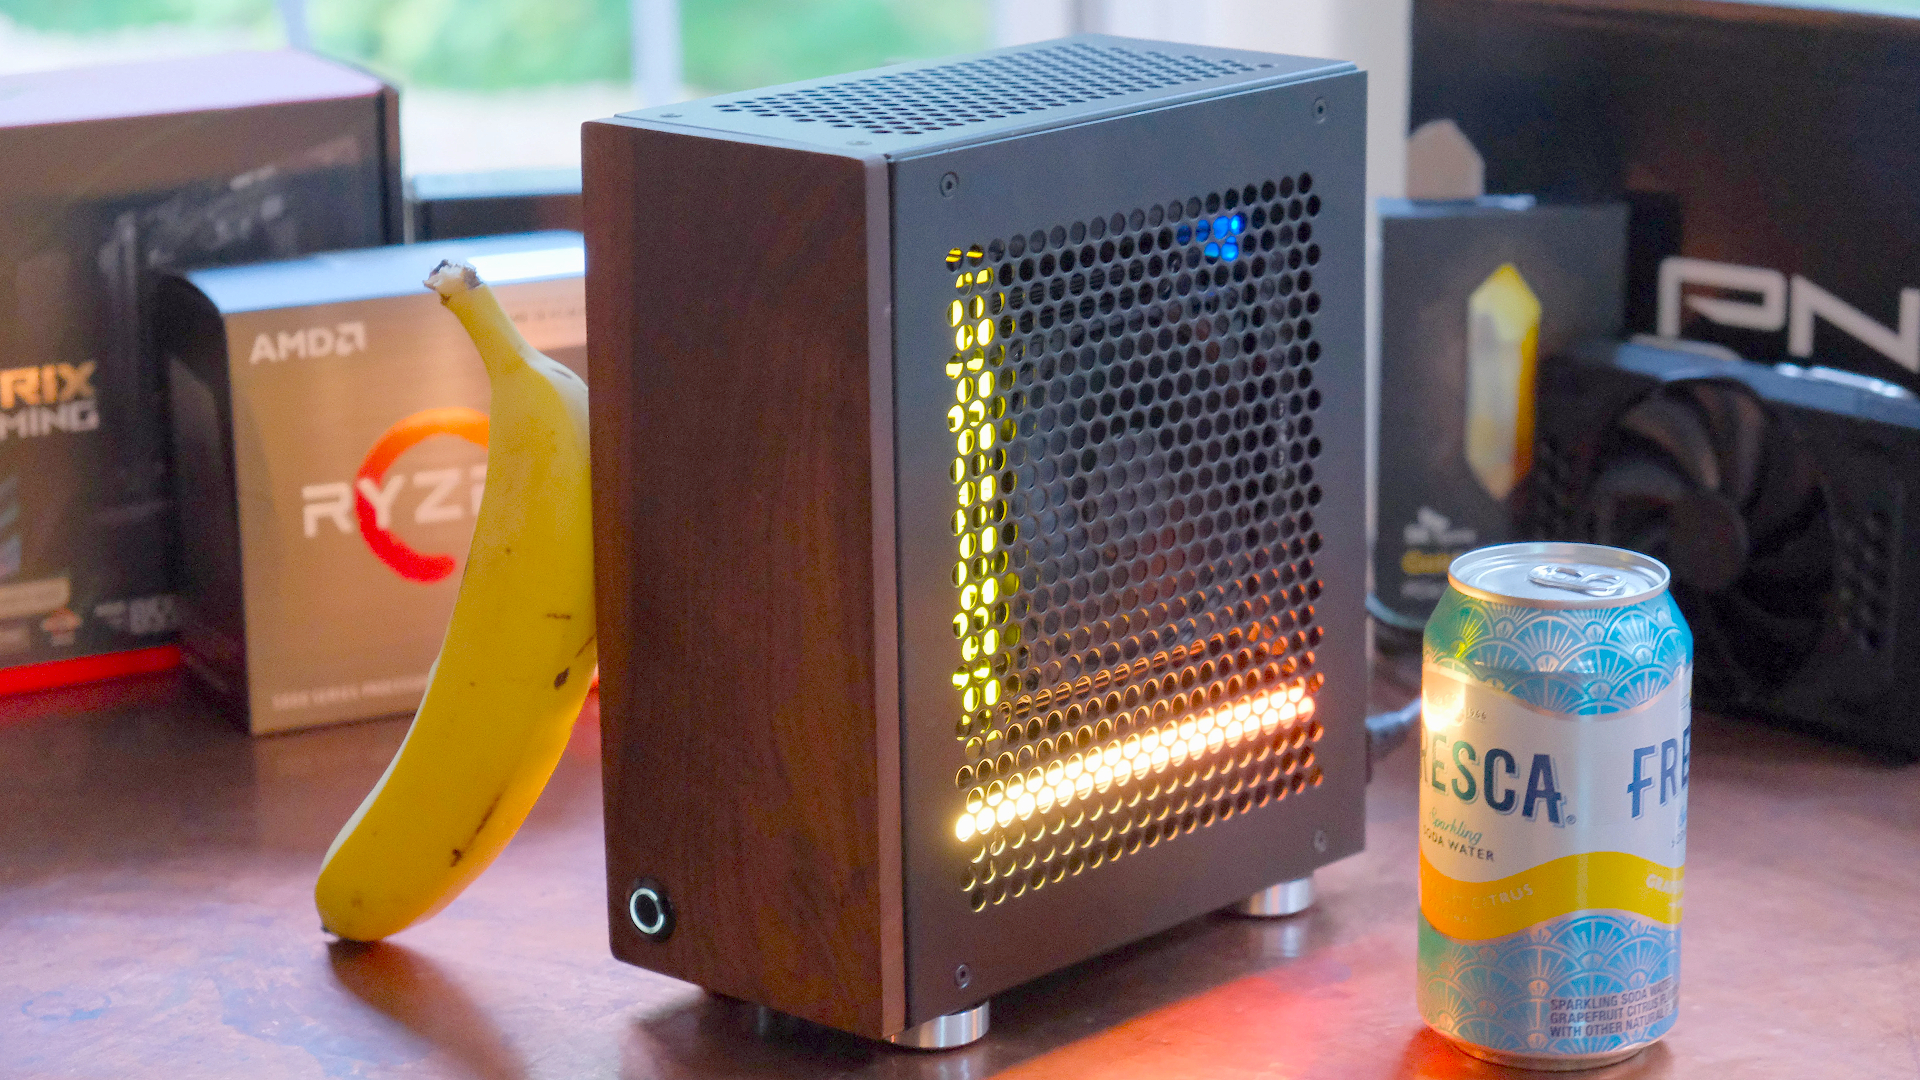 This gaming PC boasts an Nvidia RTX GPU and fits in your backpack